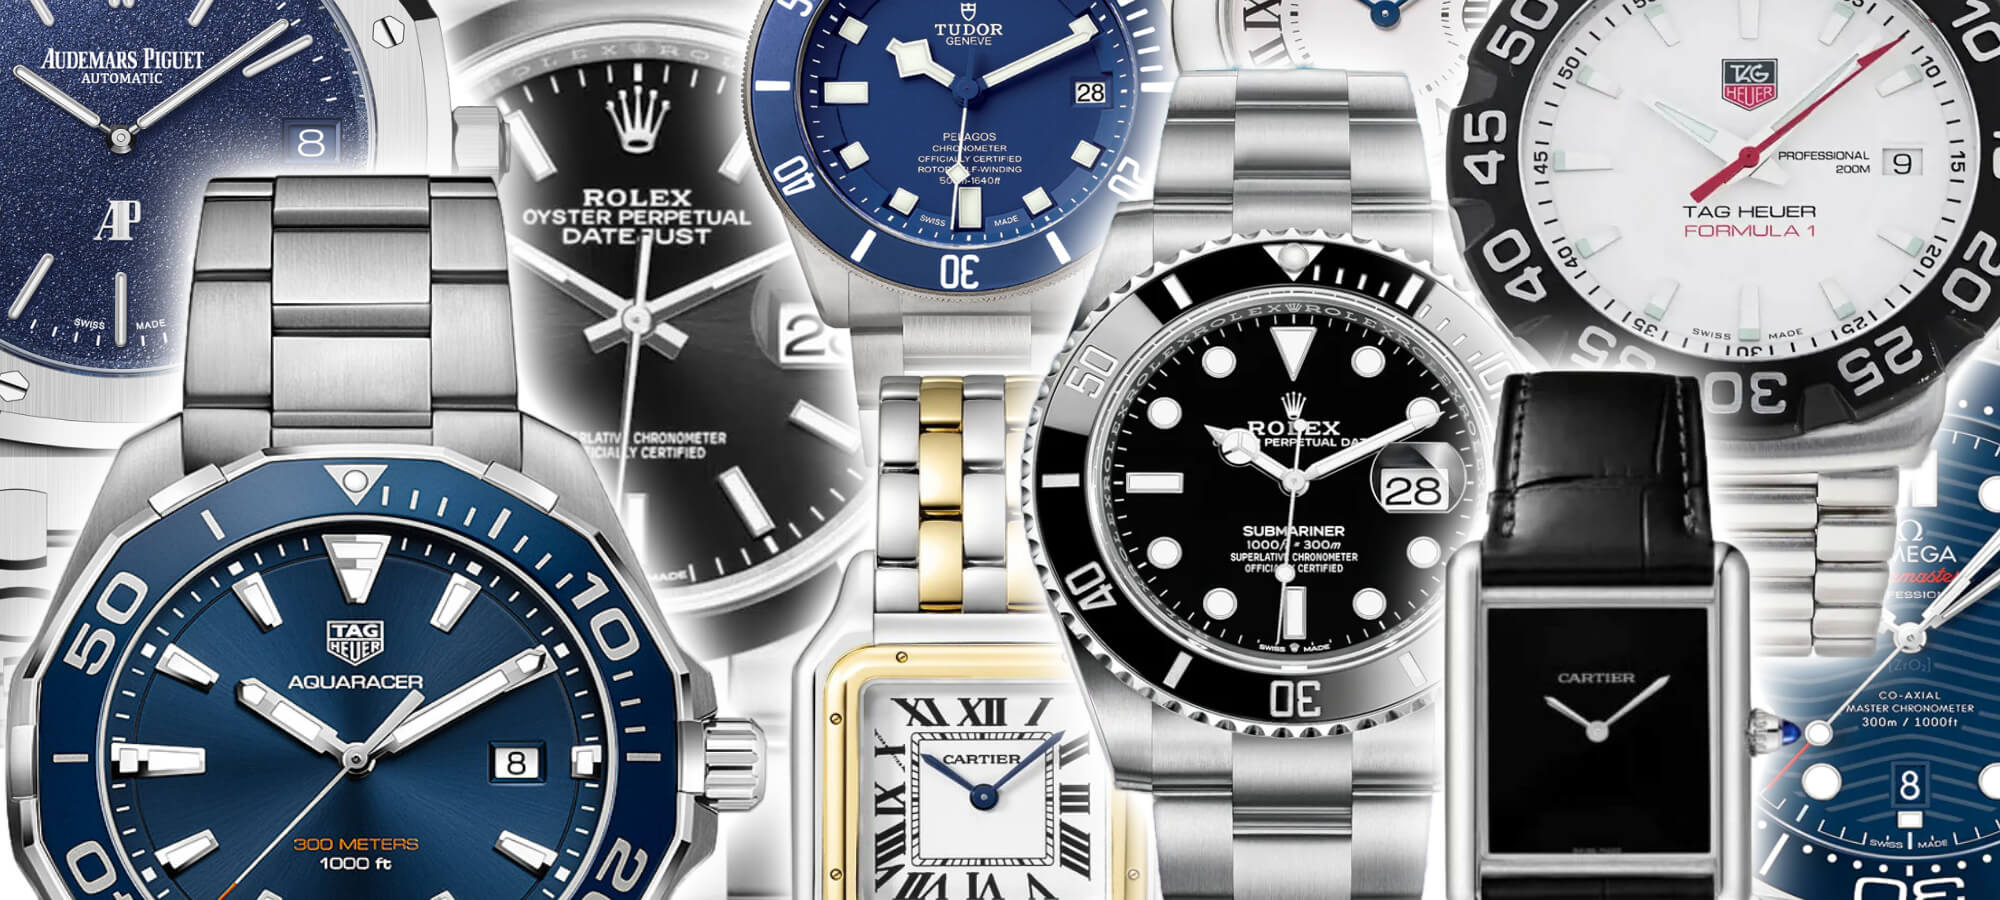 These are the new trends to anticipate in watches - WIRED Middle East